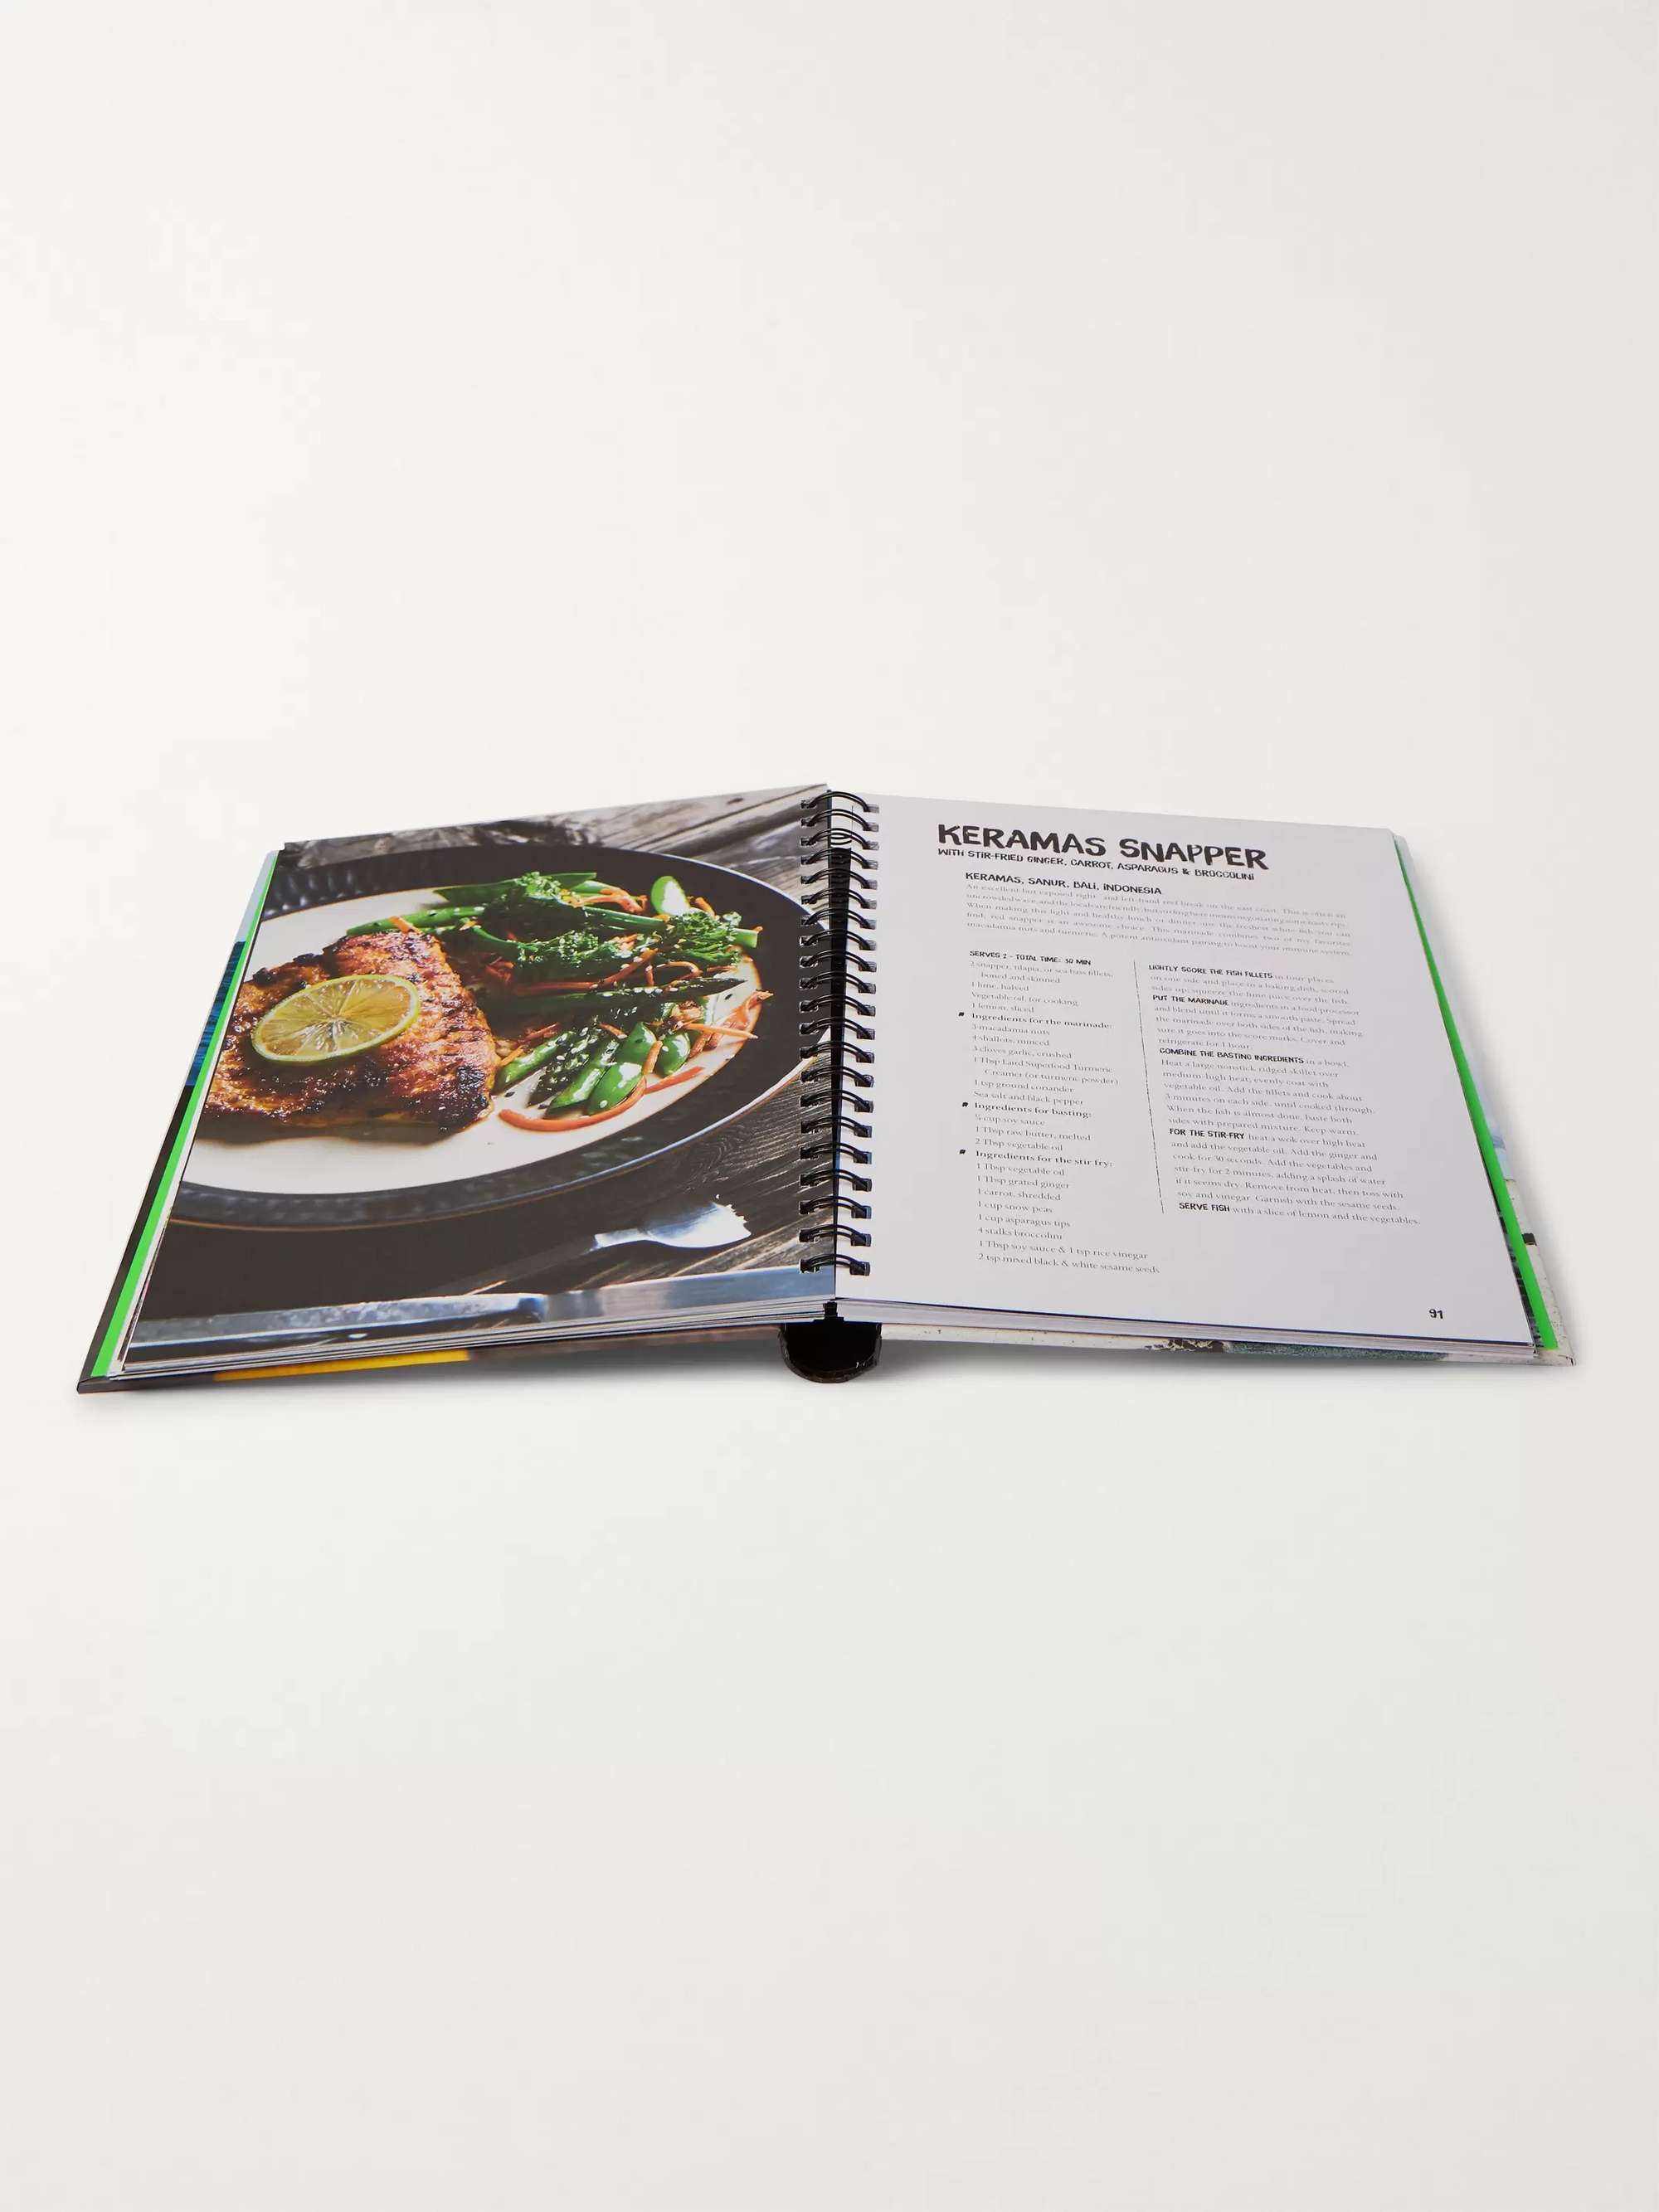 ASSOULINE Fuel Up with Laird Hamilton: Global Recipes for High-Performance Humans Hardcover Book